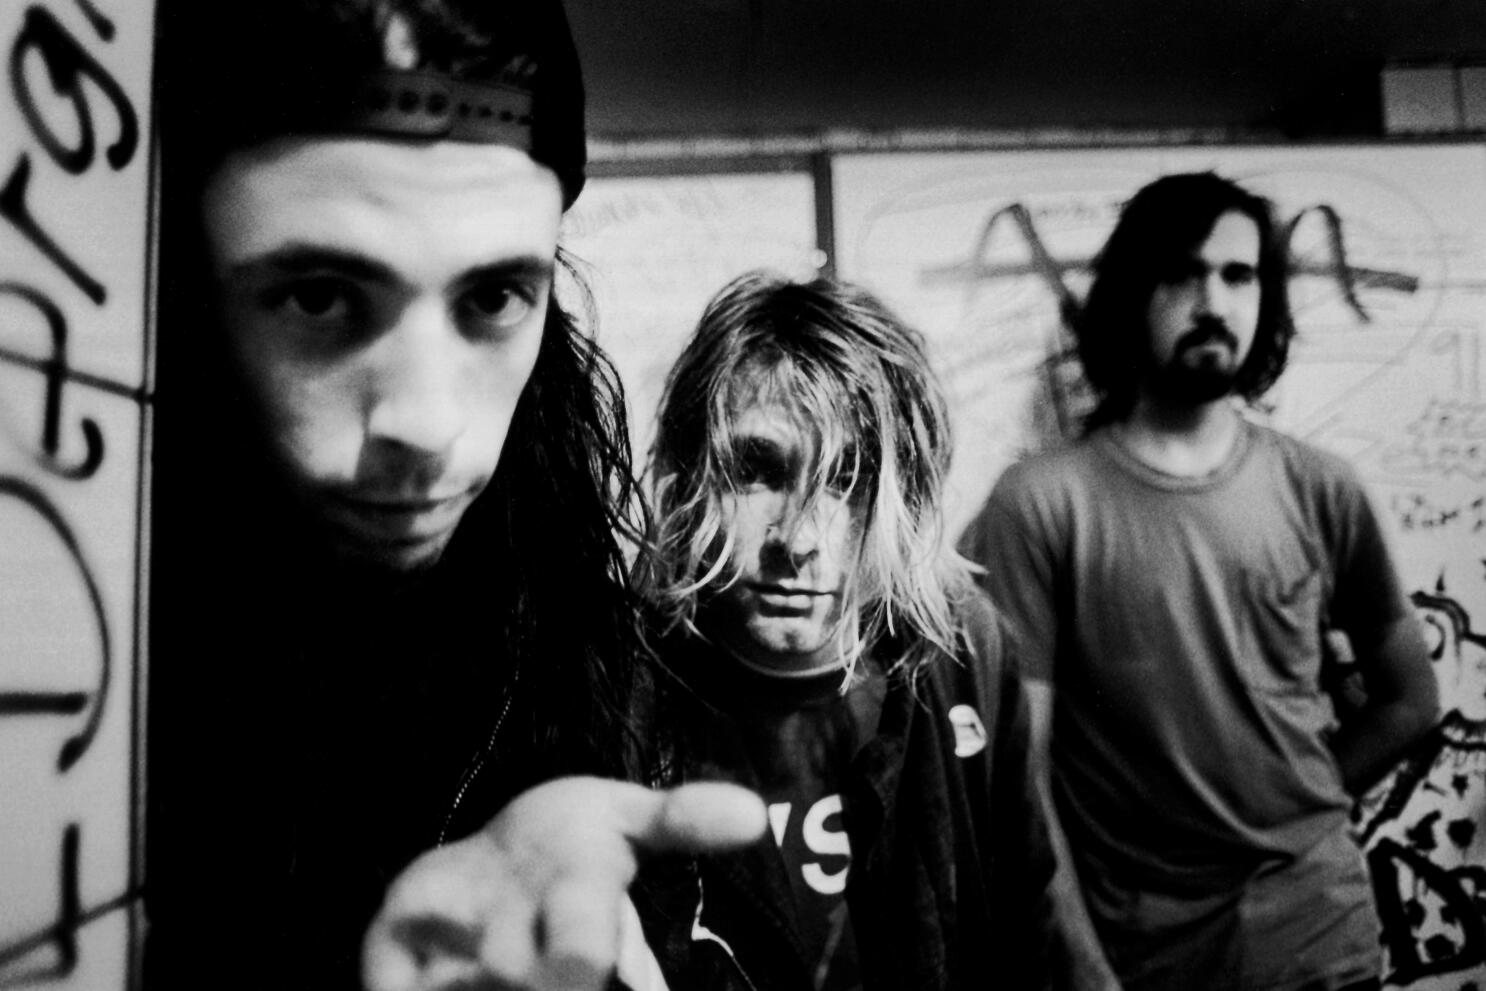 Nirvana's 'Nevermind' voted the most iconic album cover of all time